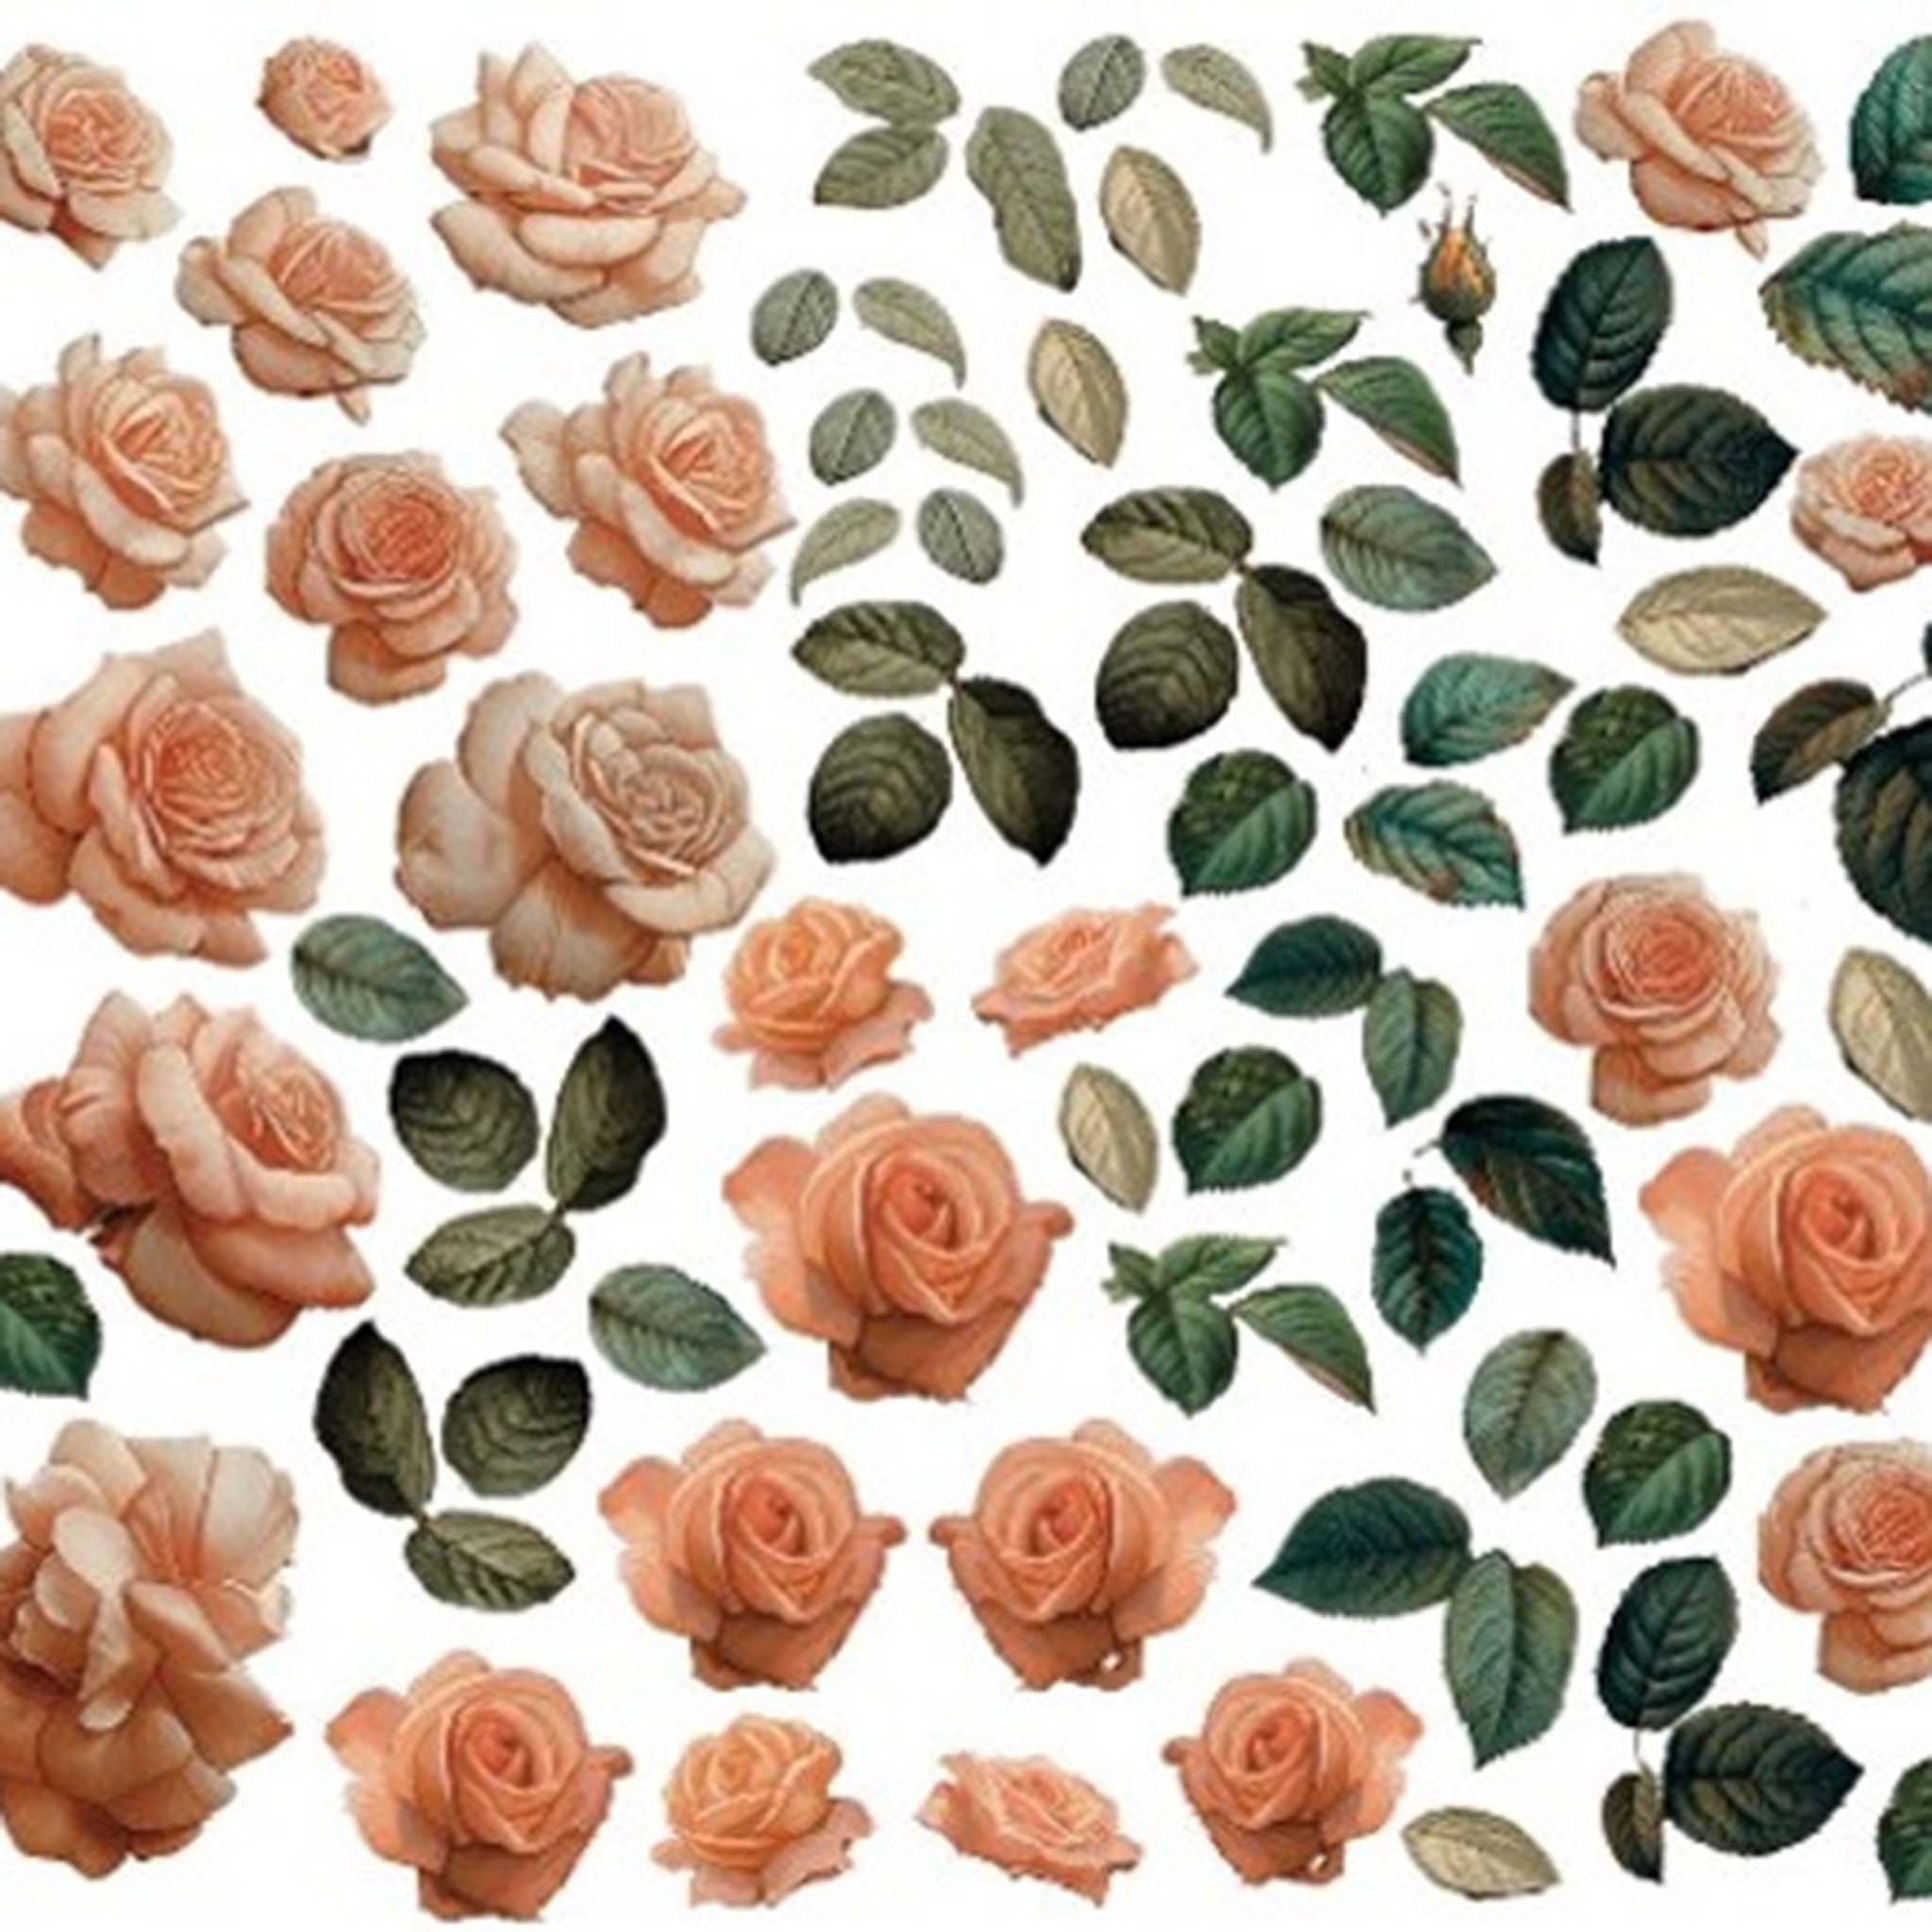 Close-up of an A4 Plus rice paper design that featuring individual rose blooms of varying sizes and leaves